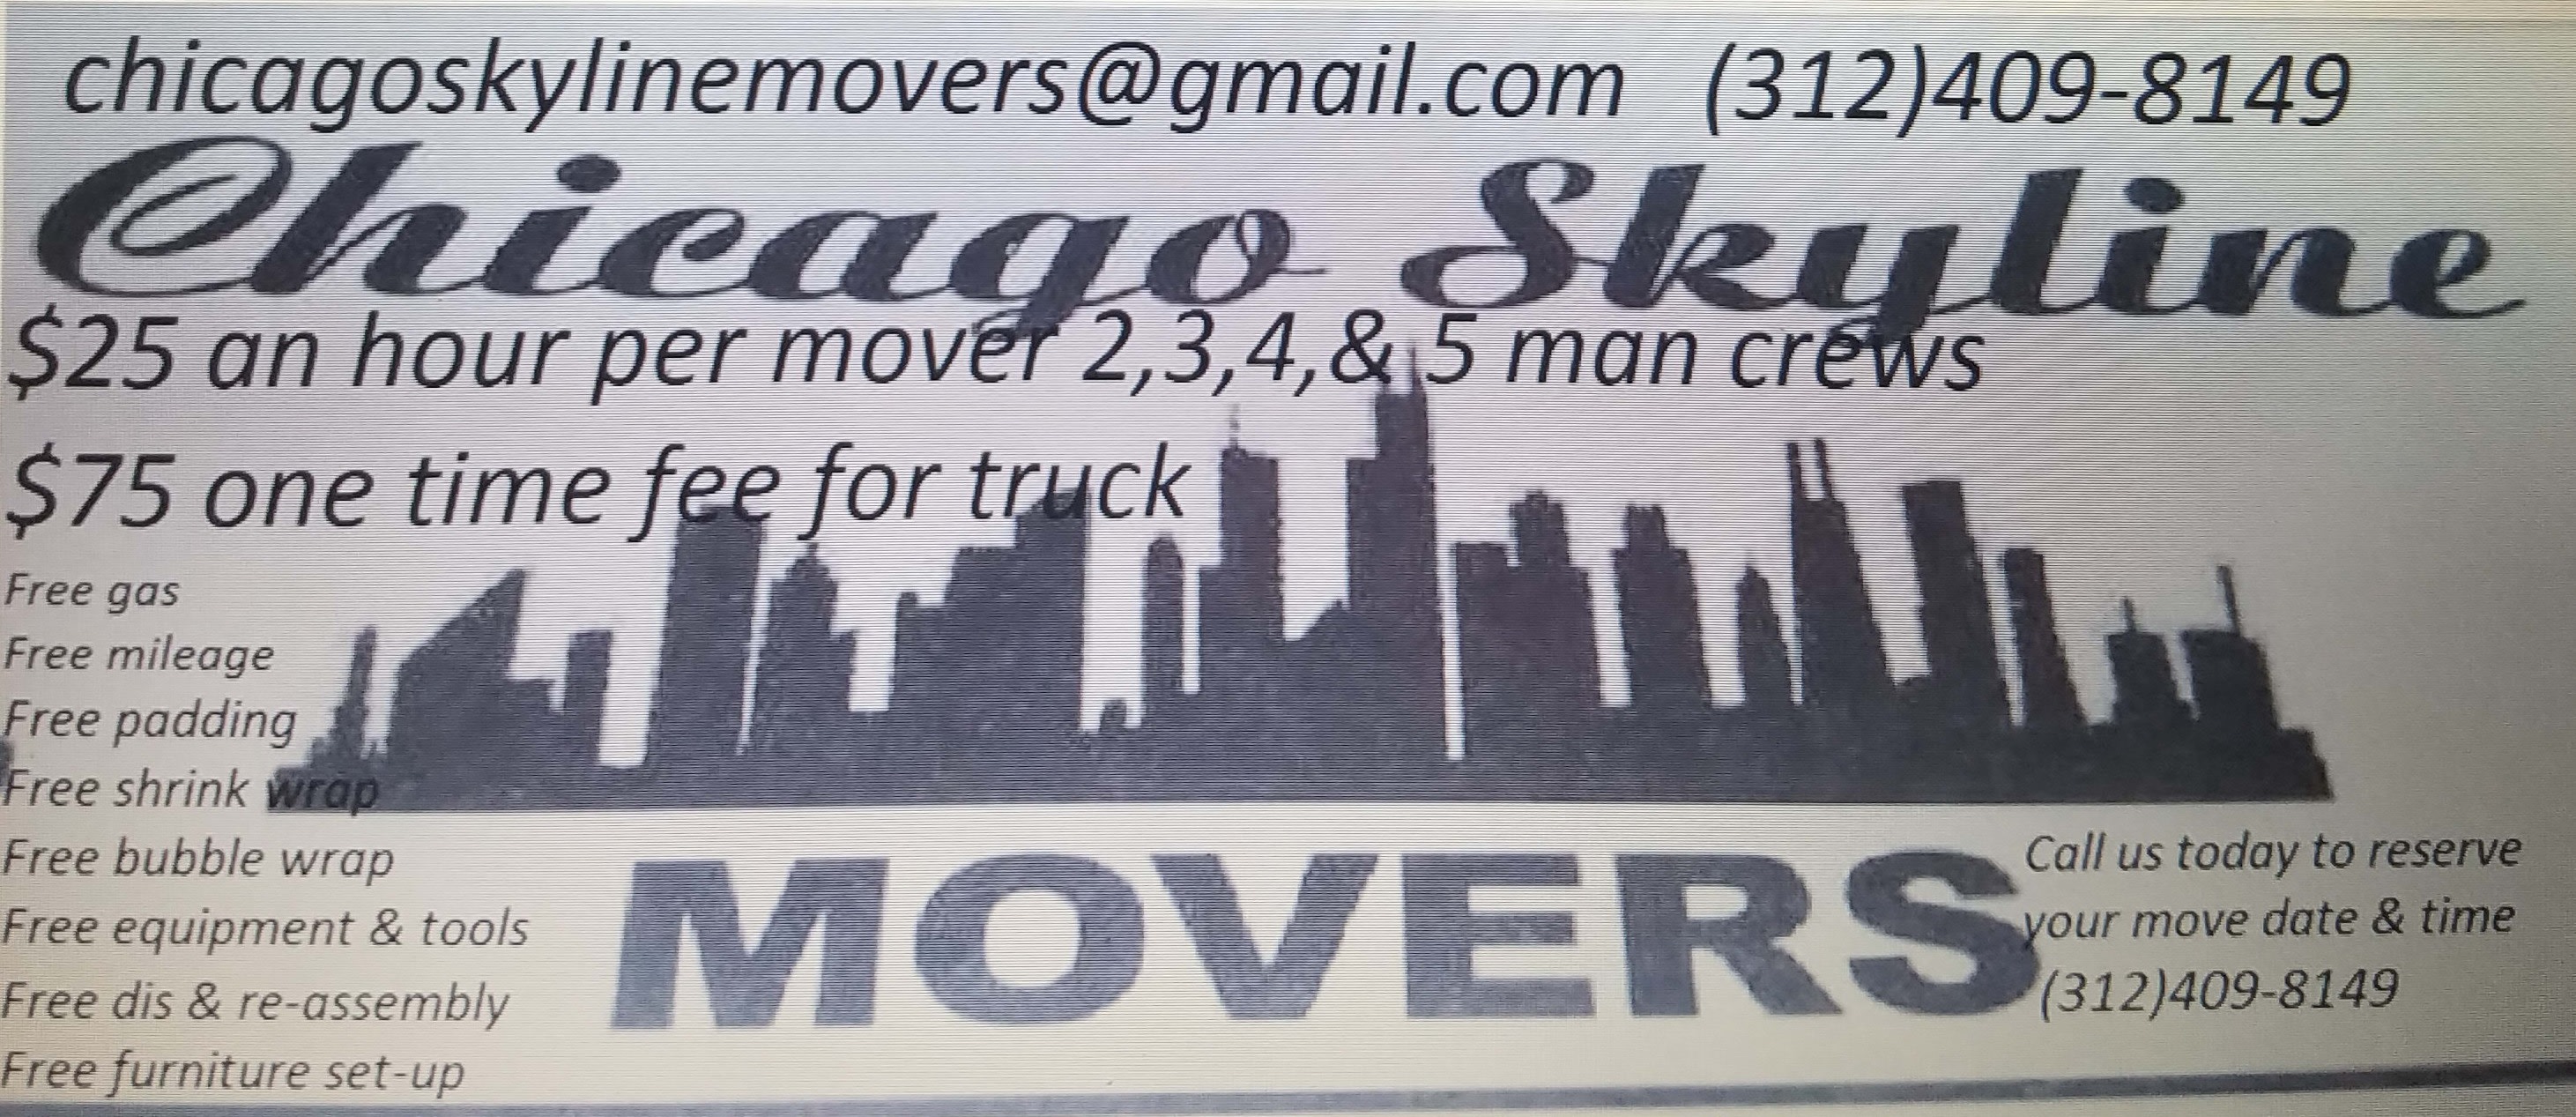 Chicago Skyline Movers